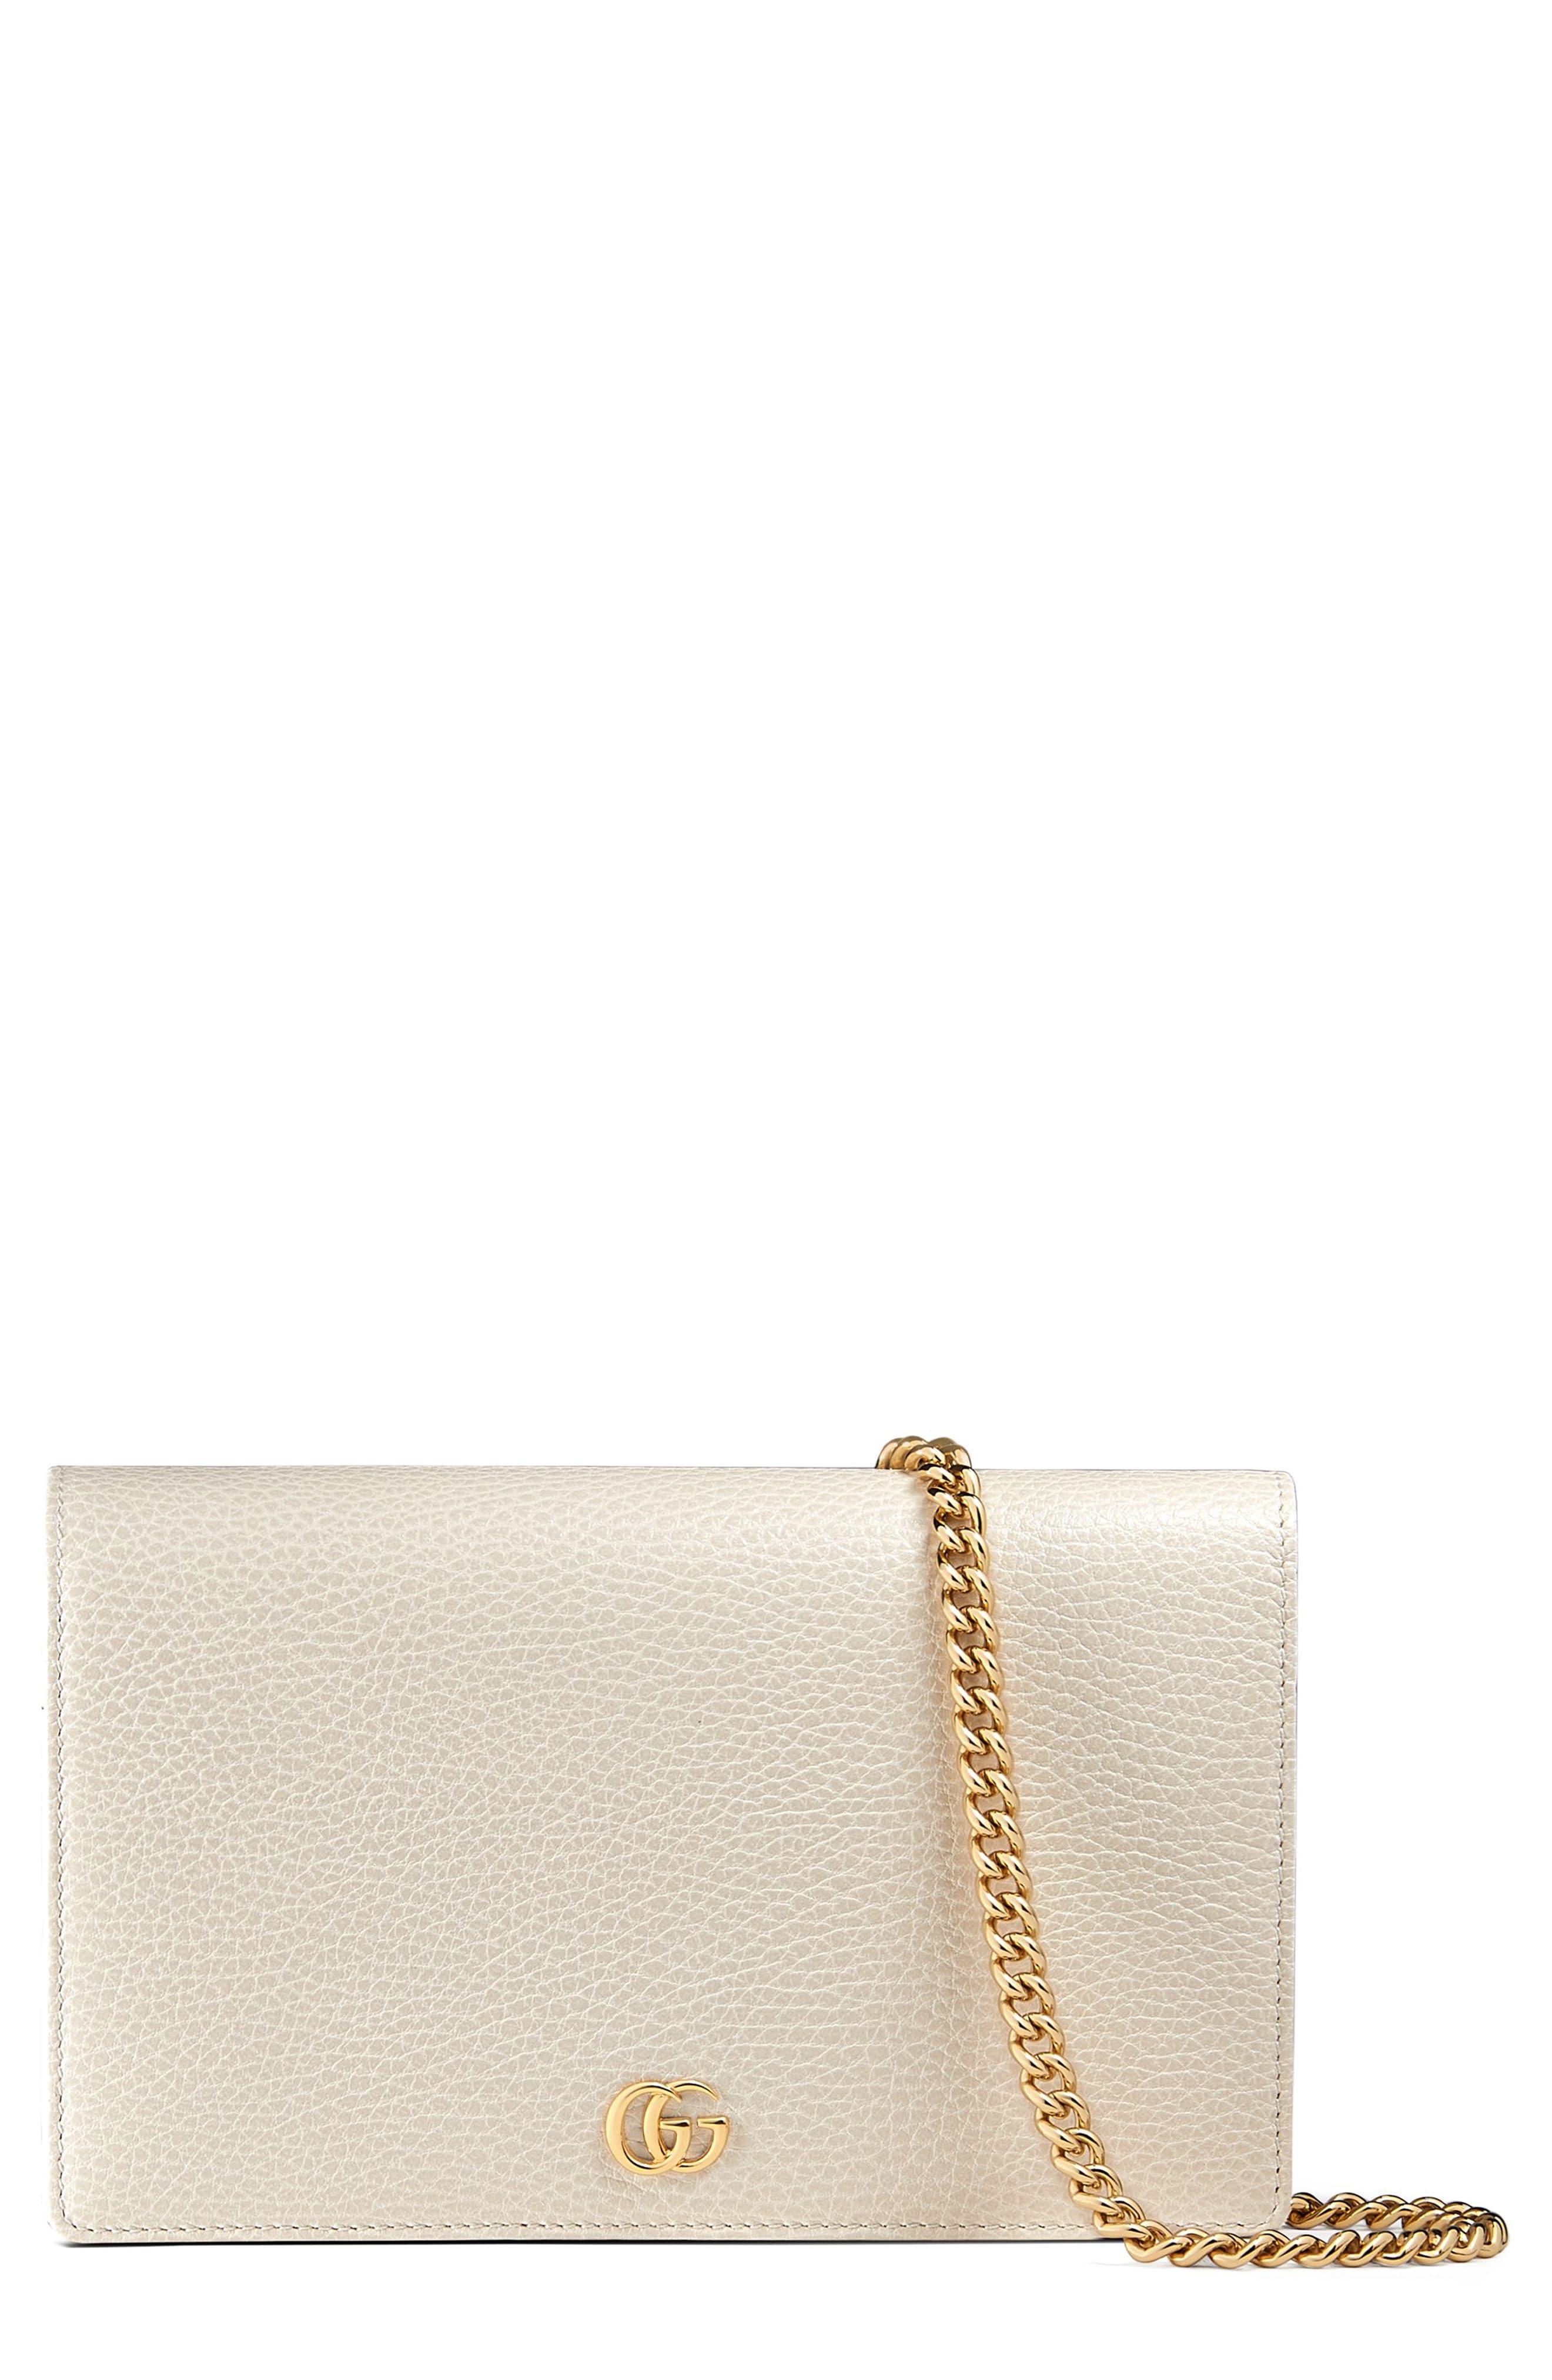 Gucci Marmont Leather Wallet On A Chain in White - Lyst